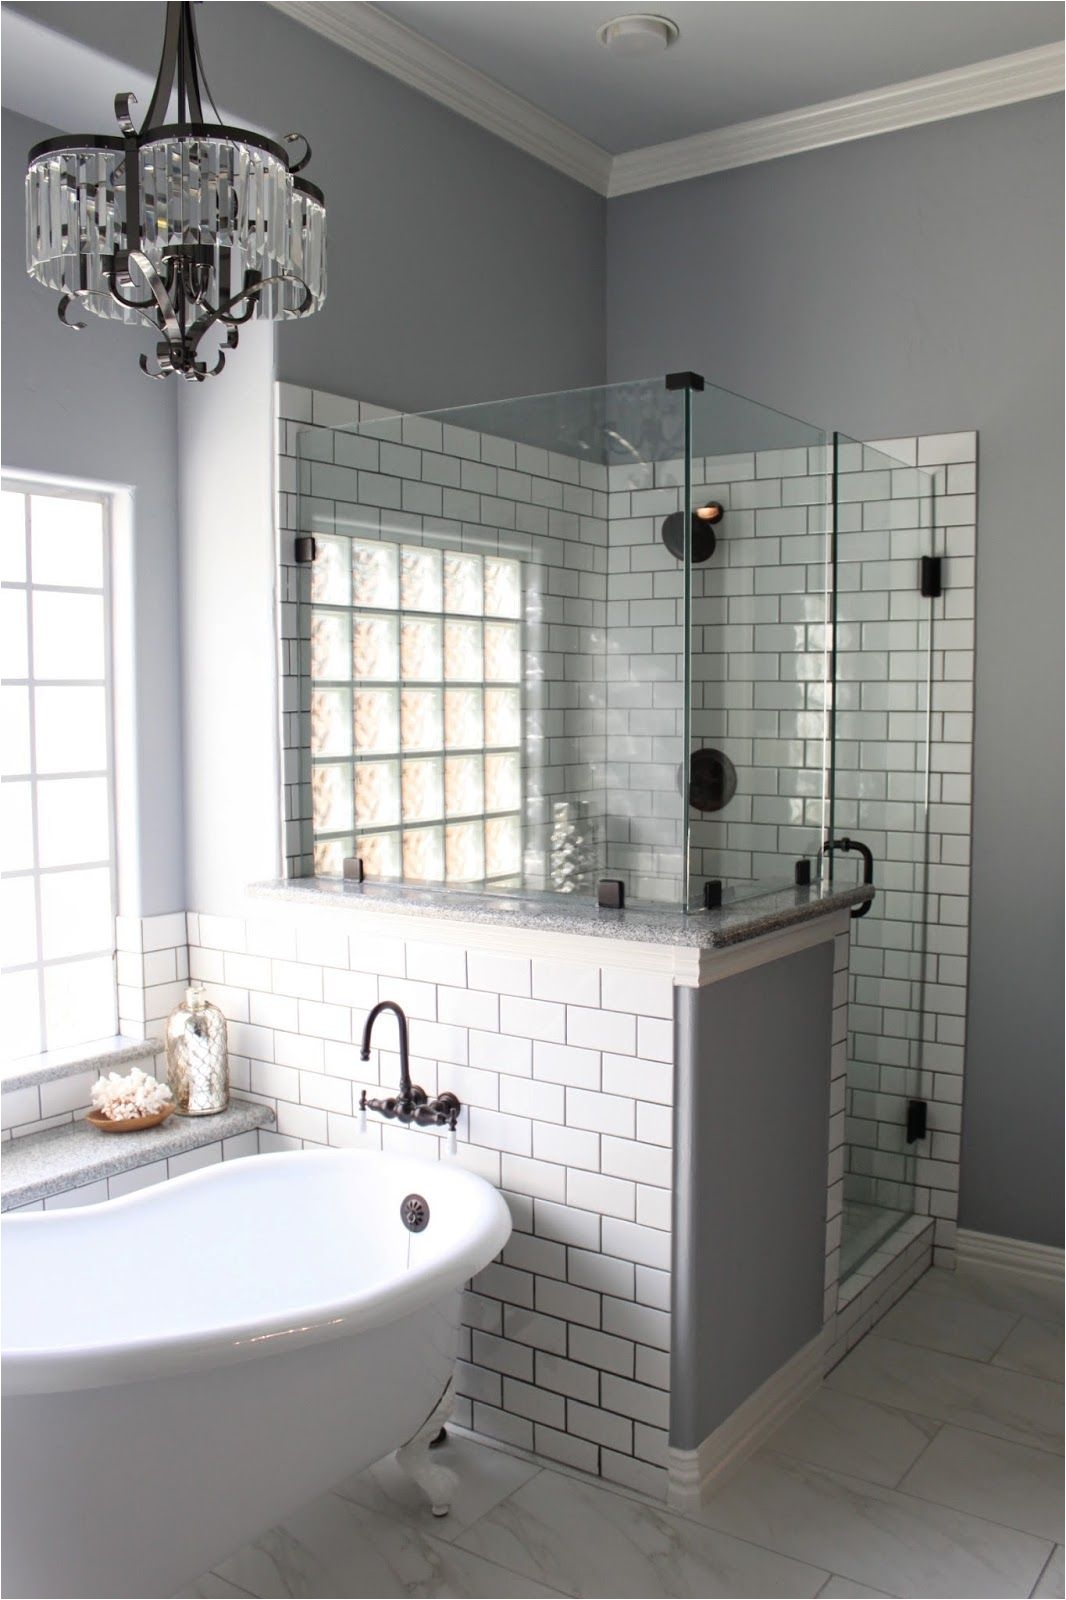 white subway tile with gray grout id like this with all glass block